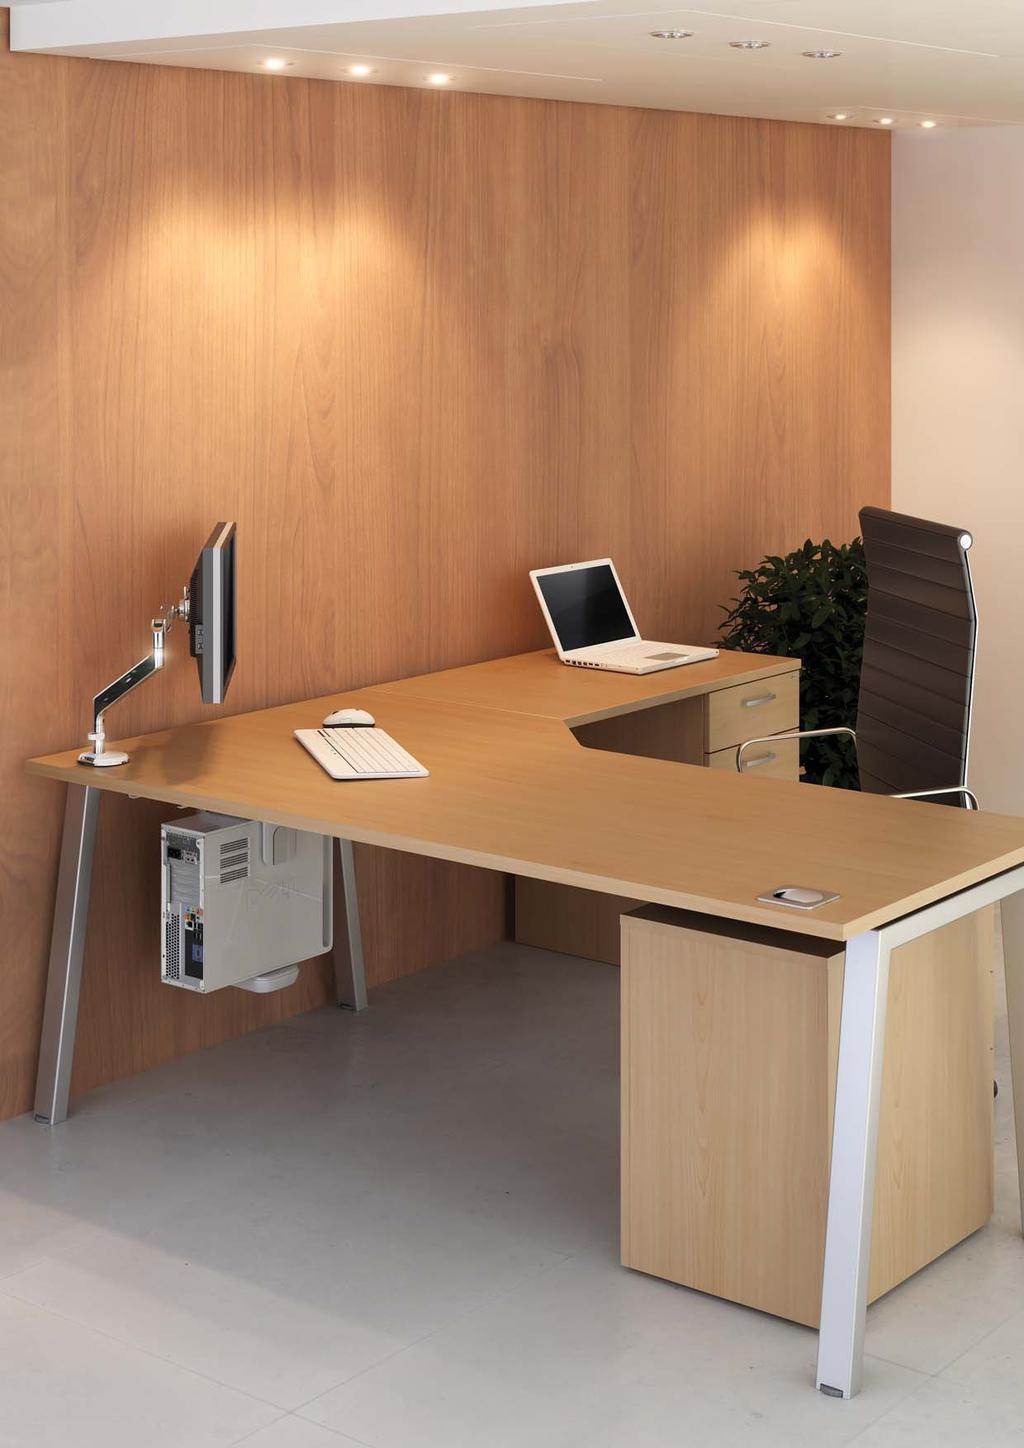 Extension pedestal s can be added to the return side of angular desks to increase the users working space and represent a managerial look.